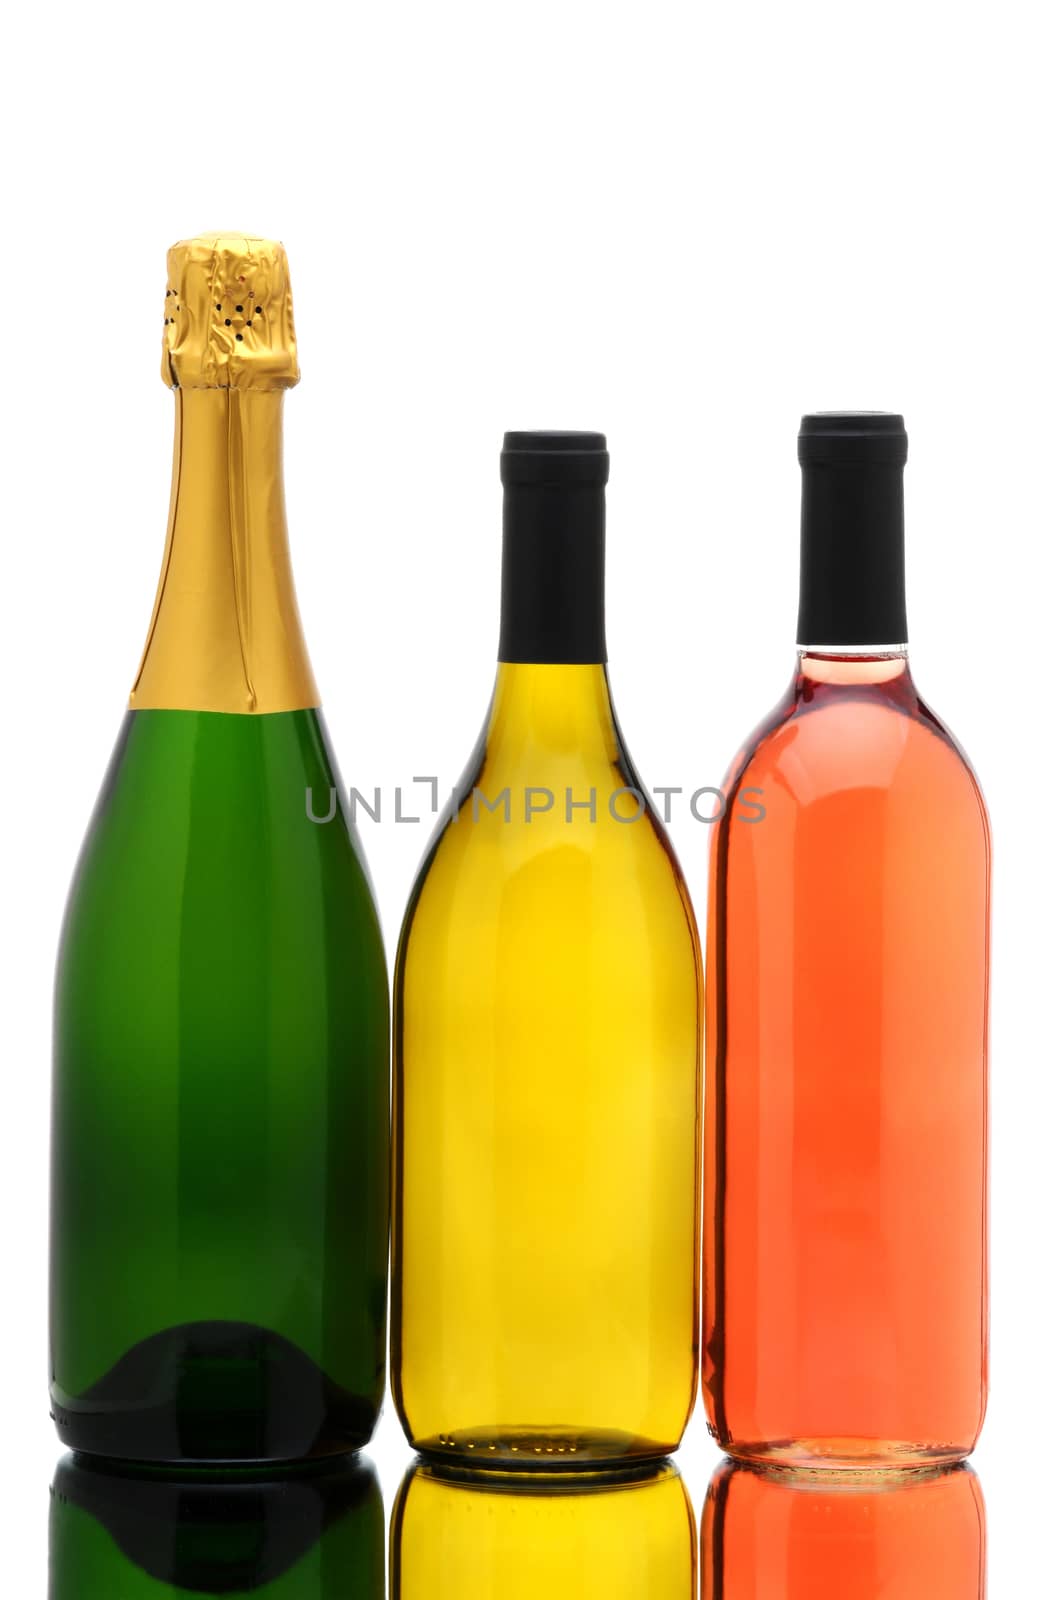 Bottles of Champagne, Chardonnay and White Zinfandel isolated on white with reflections in table top. Vertical Composition